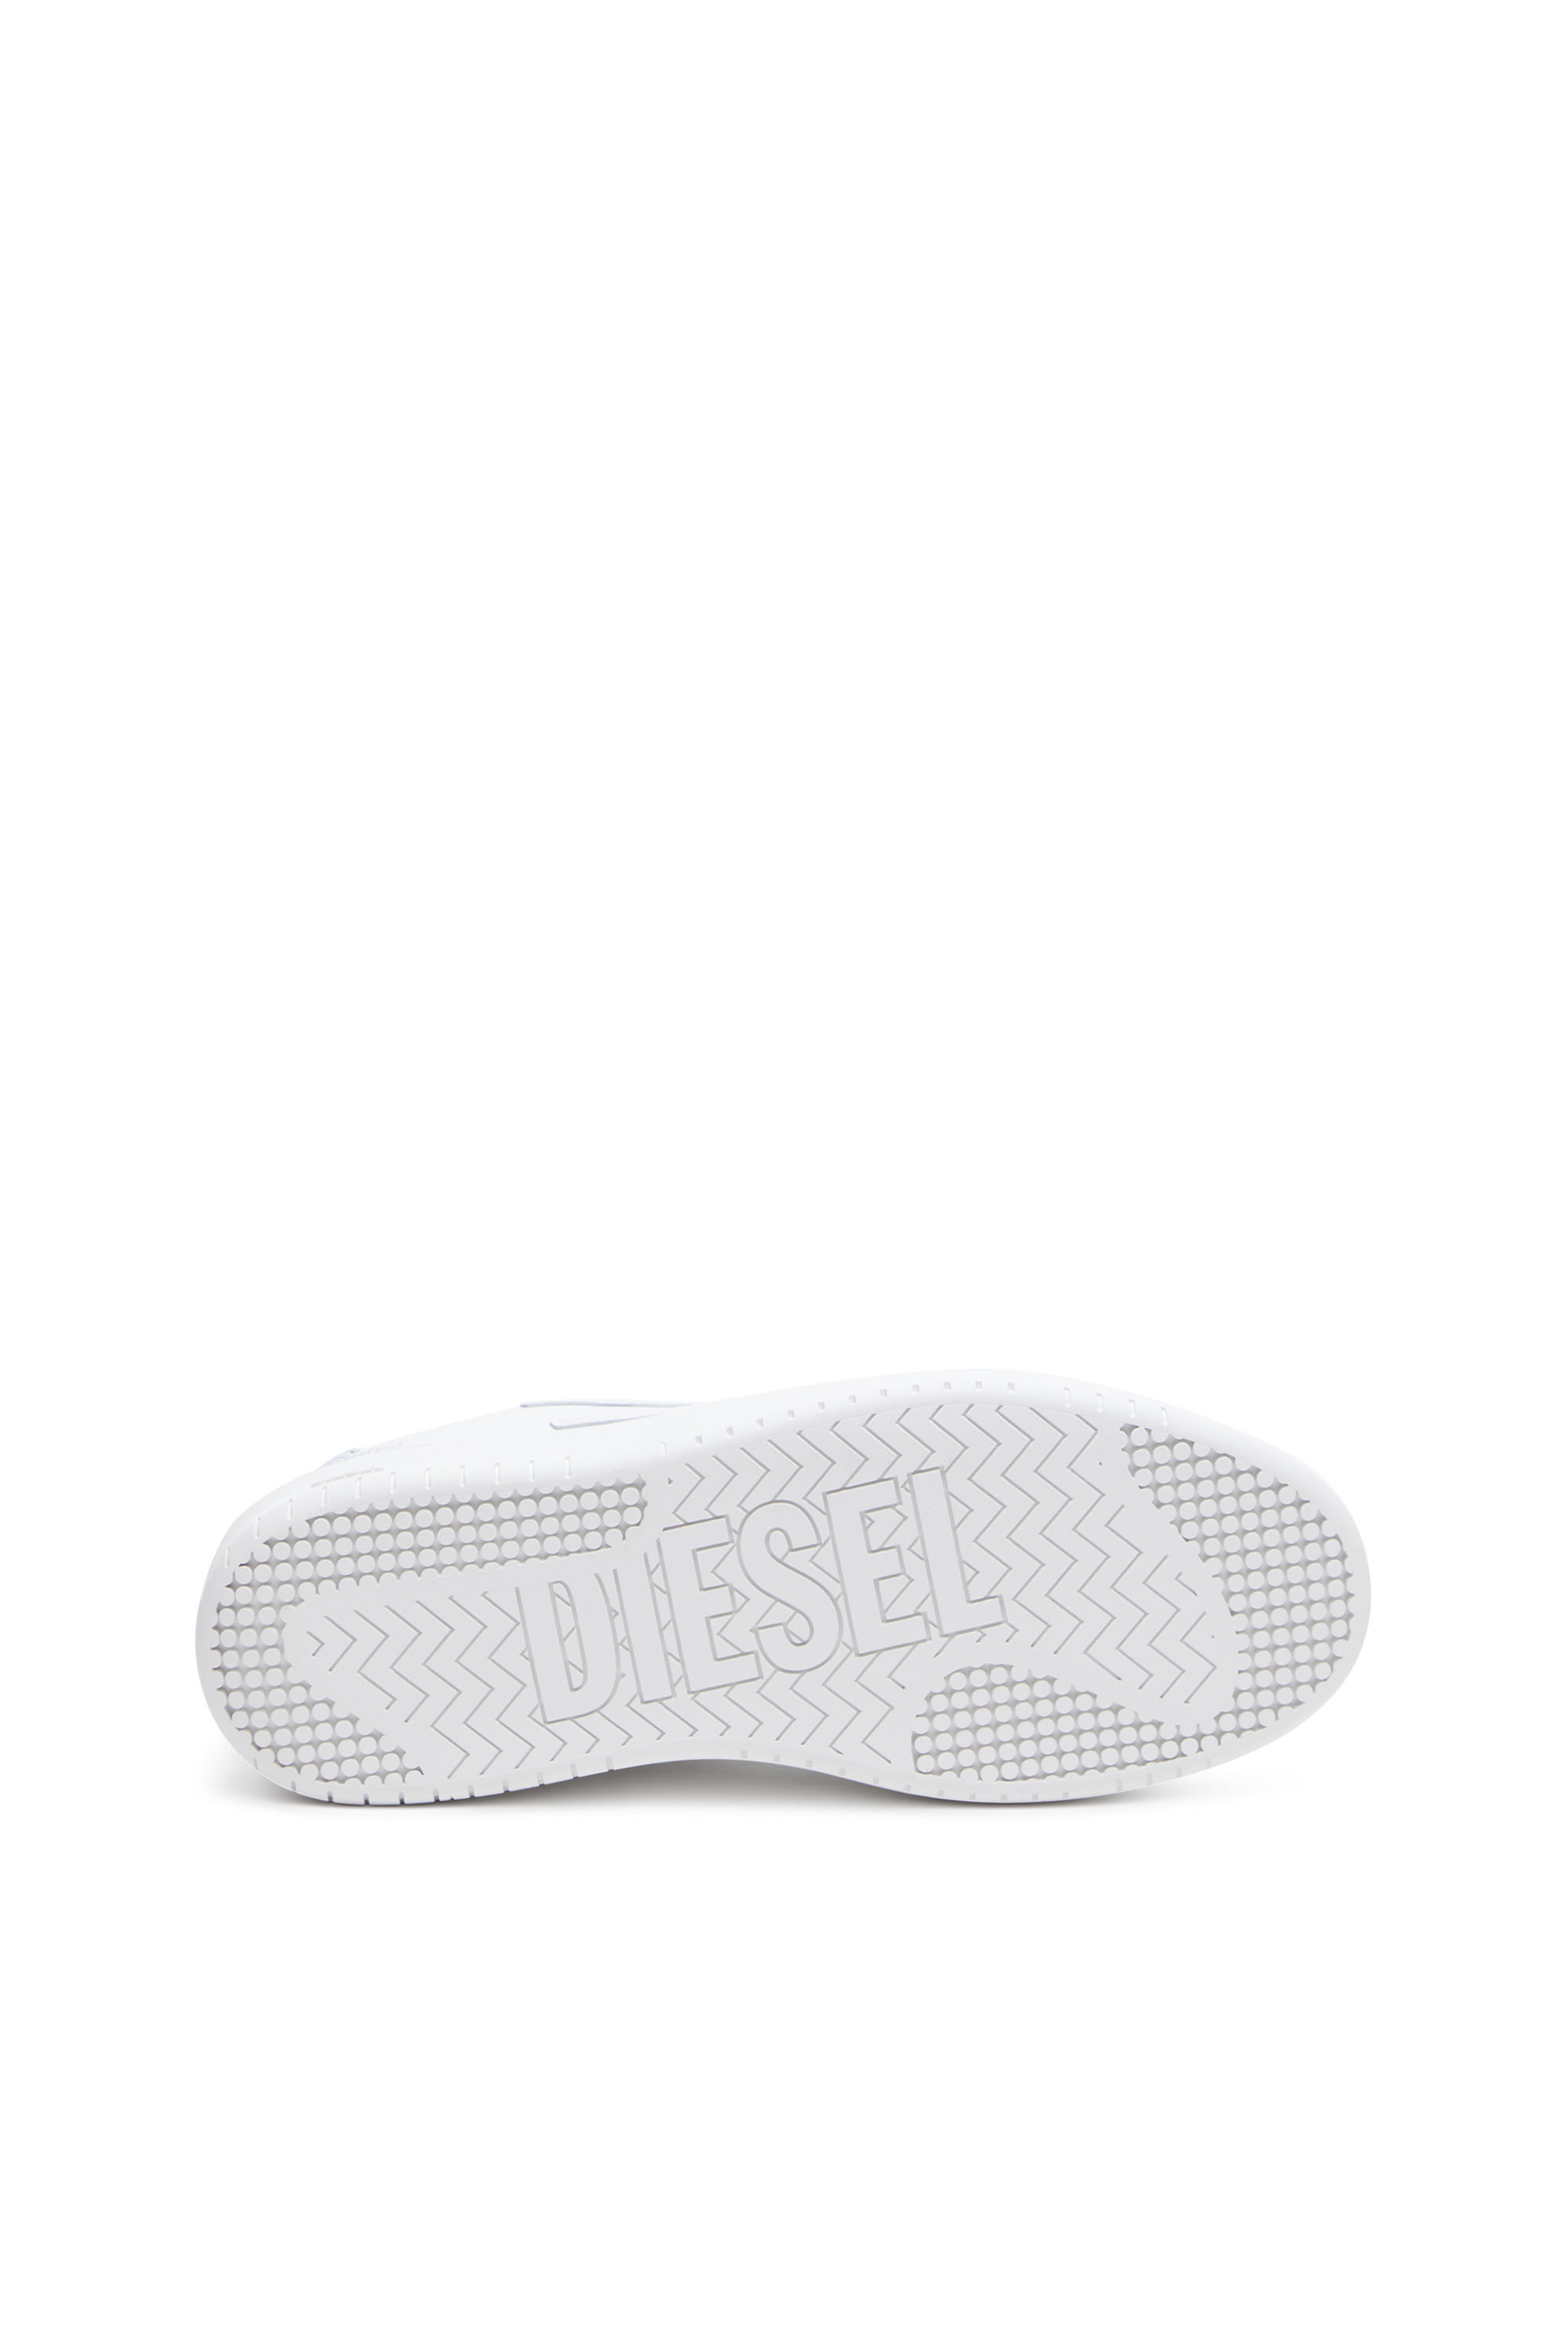 Diesel - S-ATHENE BOLD X, Woman S-Athene Bold-Flatform sneakers in leather in White - Image 4